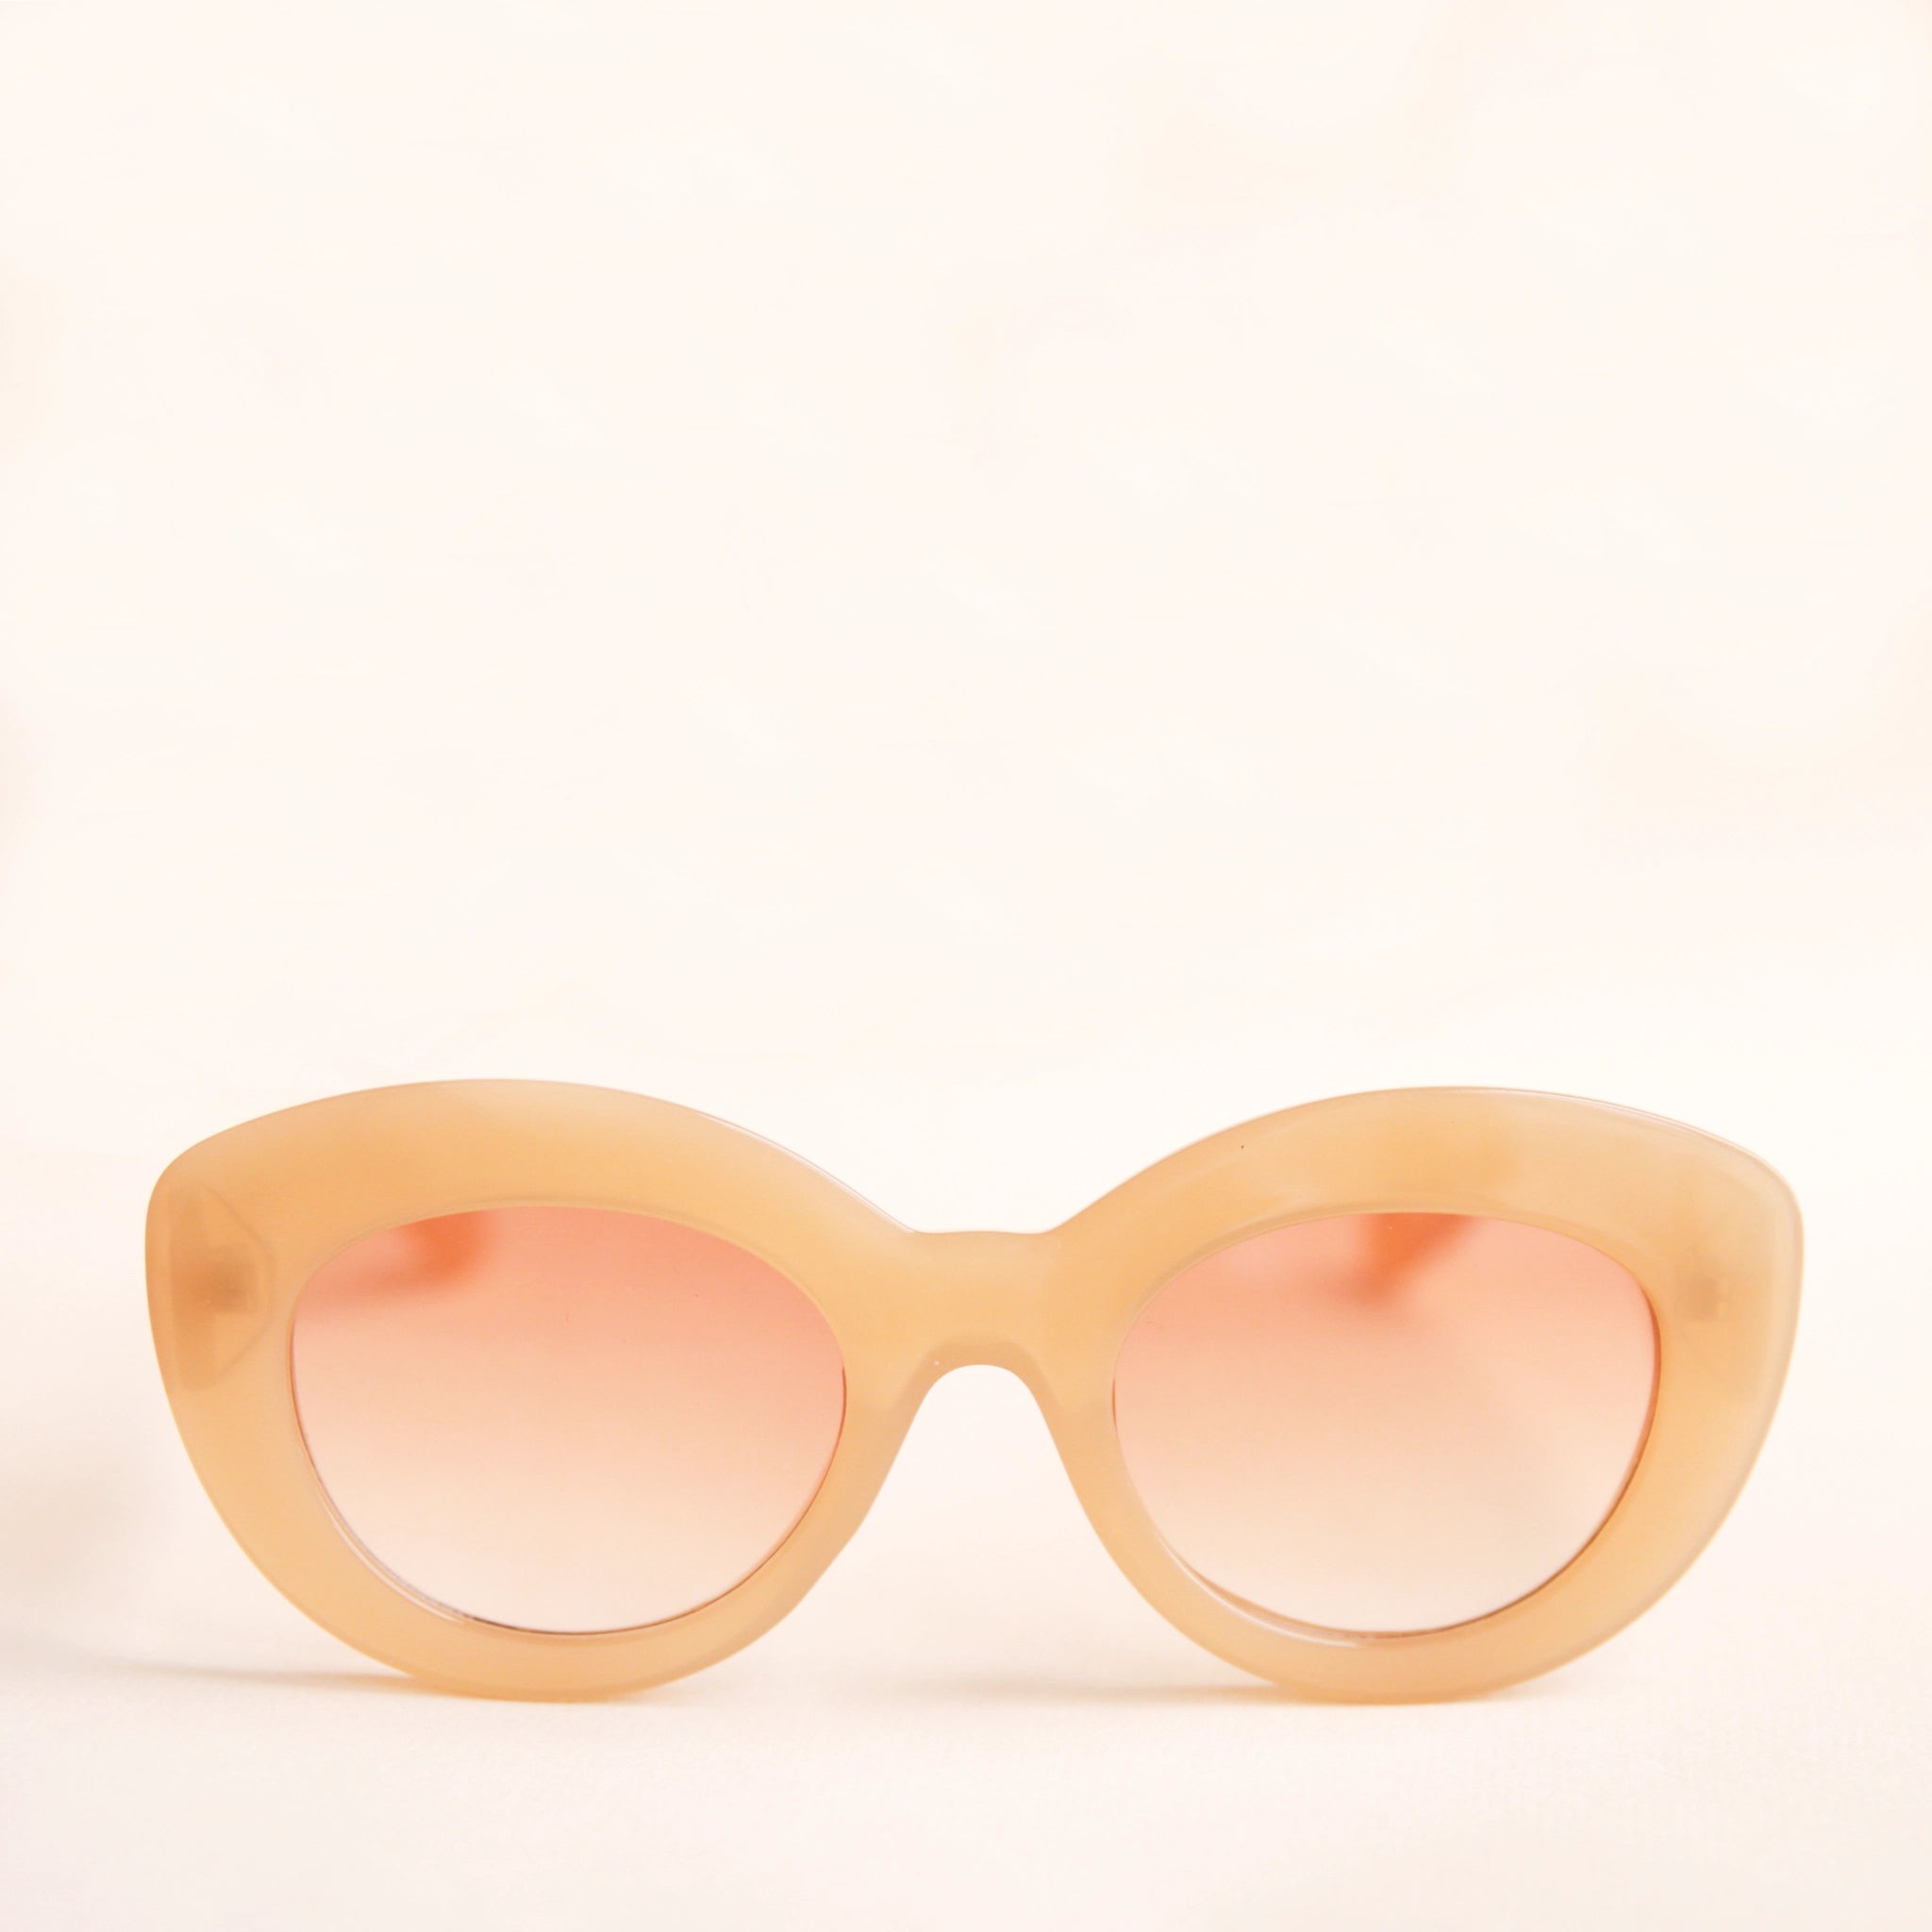 On a neutral background is the Gemma Sunglasses in the shade Amber. They have a rounded shape with a slight cateye flair at the corners. The frame material is a durable amber / peachy colored plastic and the lenses are a similar tone.